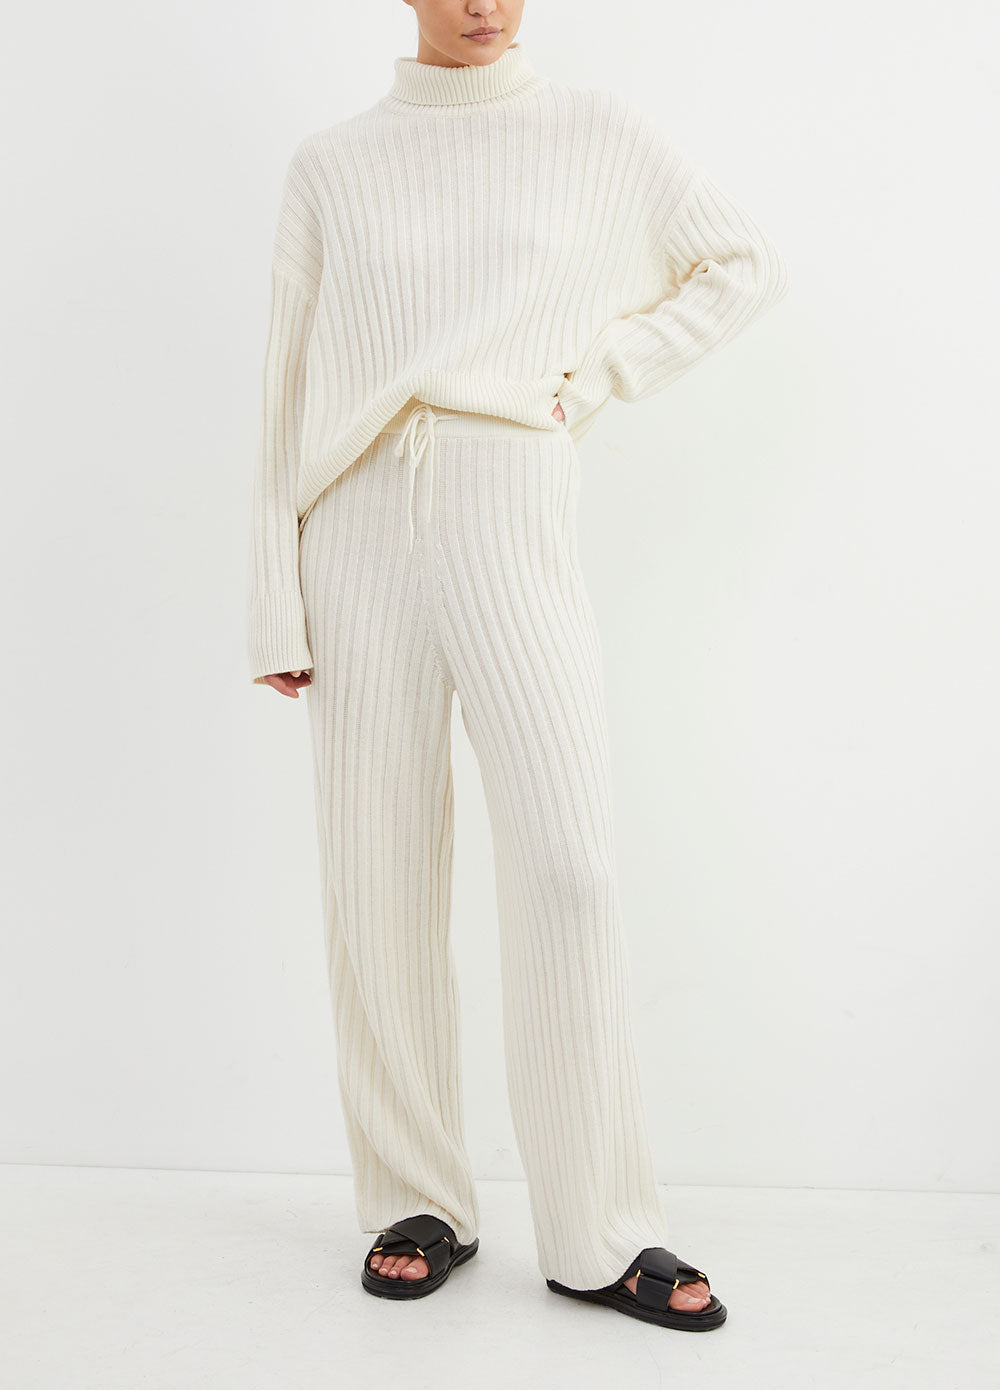 AX Paris ribbed knitted pants in white  ASOS